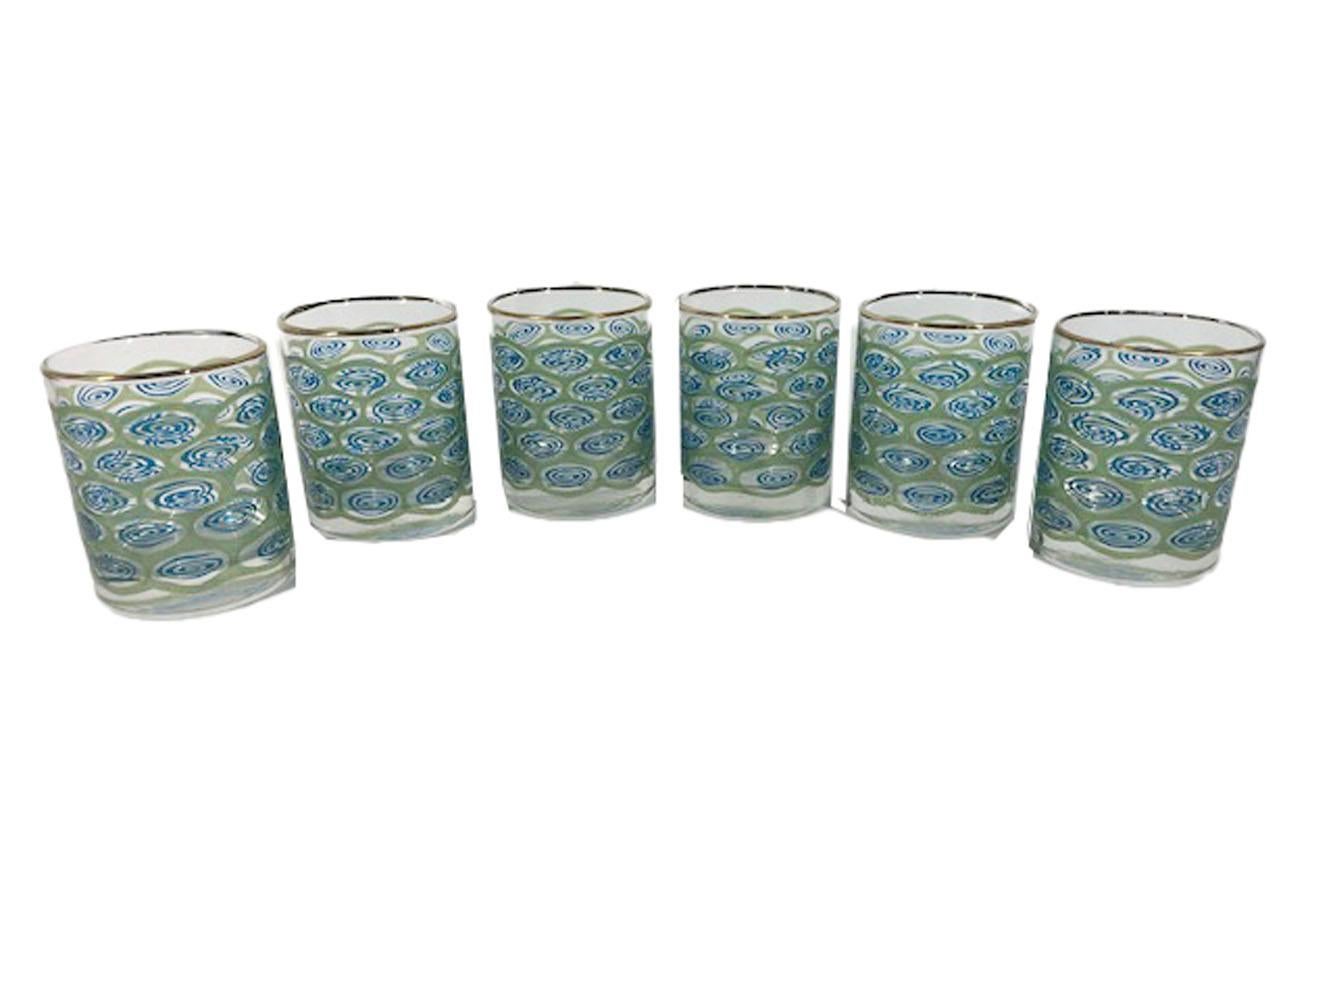 Six Libbey glass rocks glasses with gilded rims and of cylindrical form with raised translucent blue enamel swirls in a ground of raised translucent green enamel creating an abstracted design based on the 